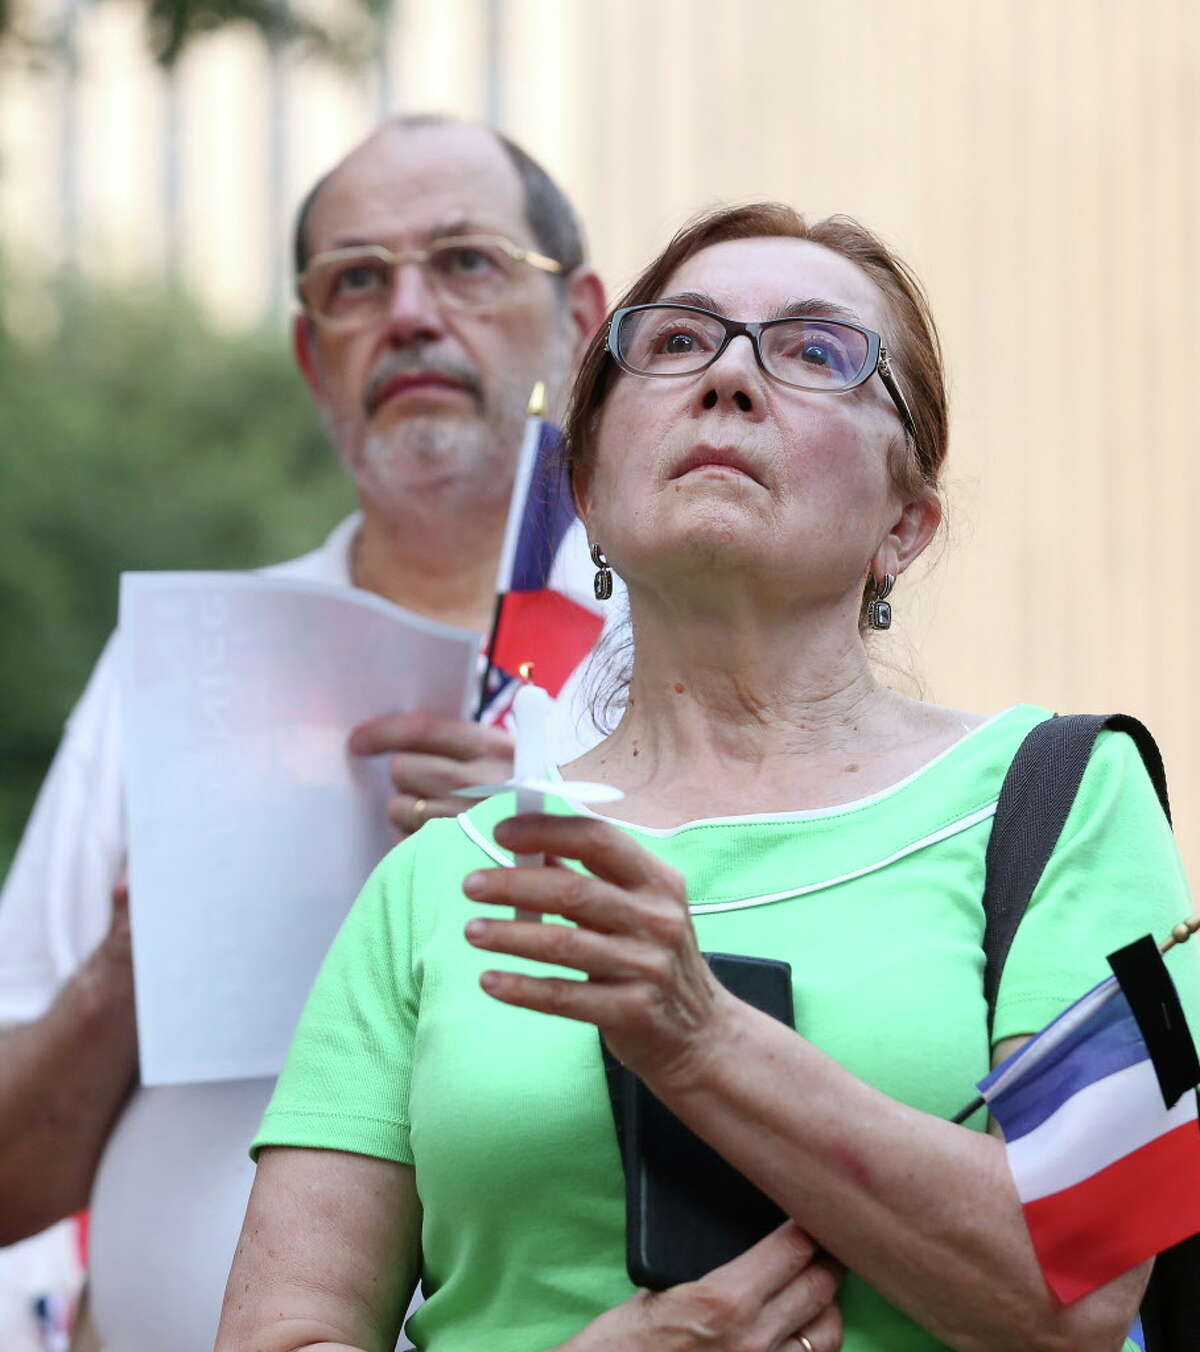 Sonia Tabarovsky, right, listens as the Consul General of France speaks during a vigil for the victims of the Nice attacks, at Hermann Square, Saturday, July 16, 2016, in Houston.